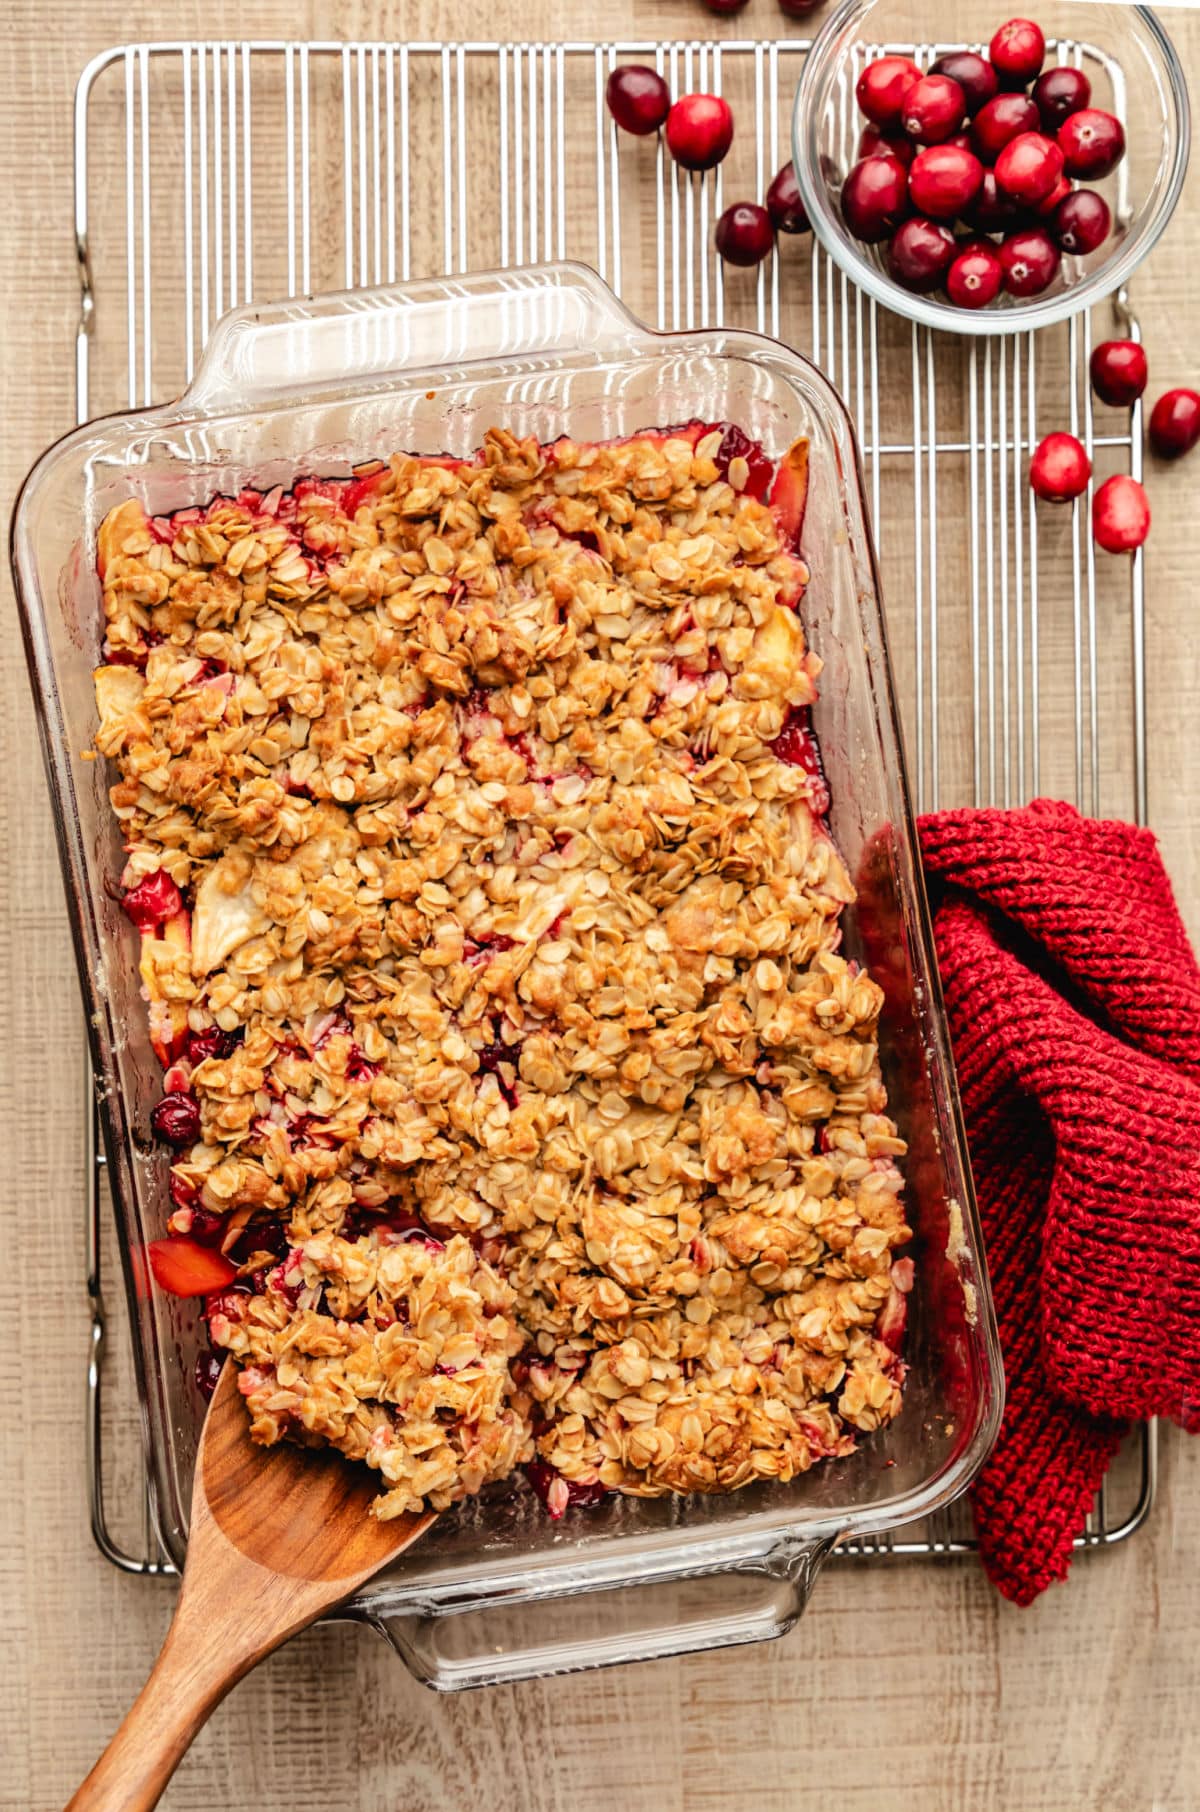 A wooden spoon scooping out cranberry apple crisp from the dish.